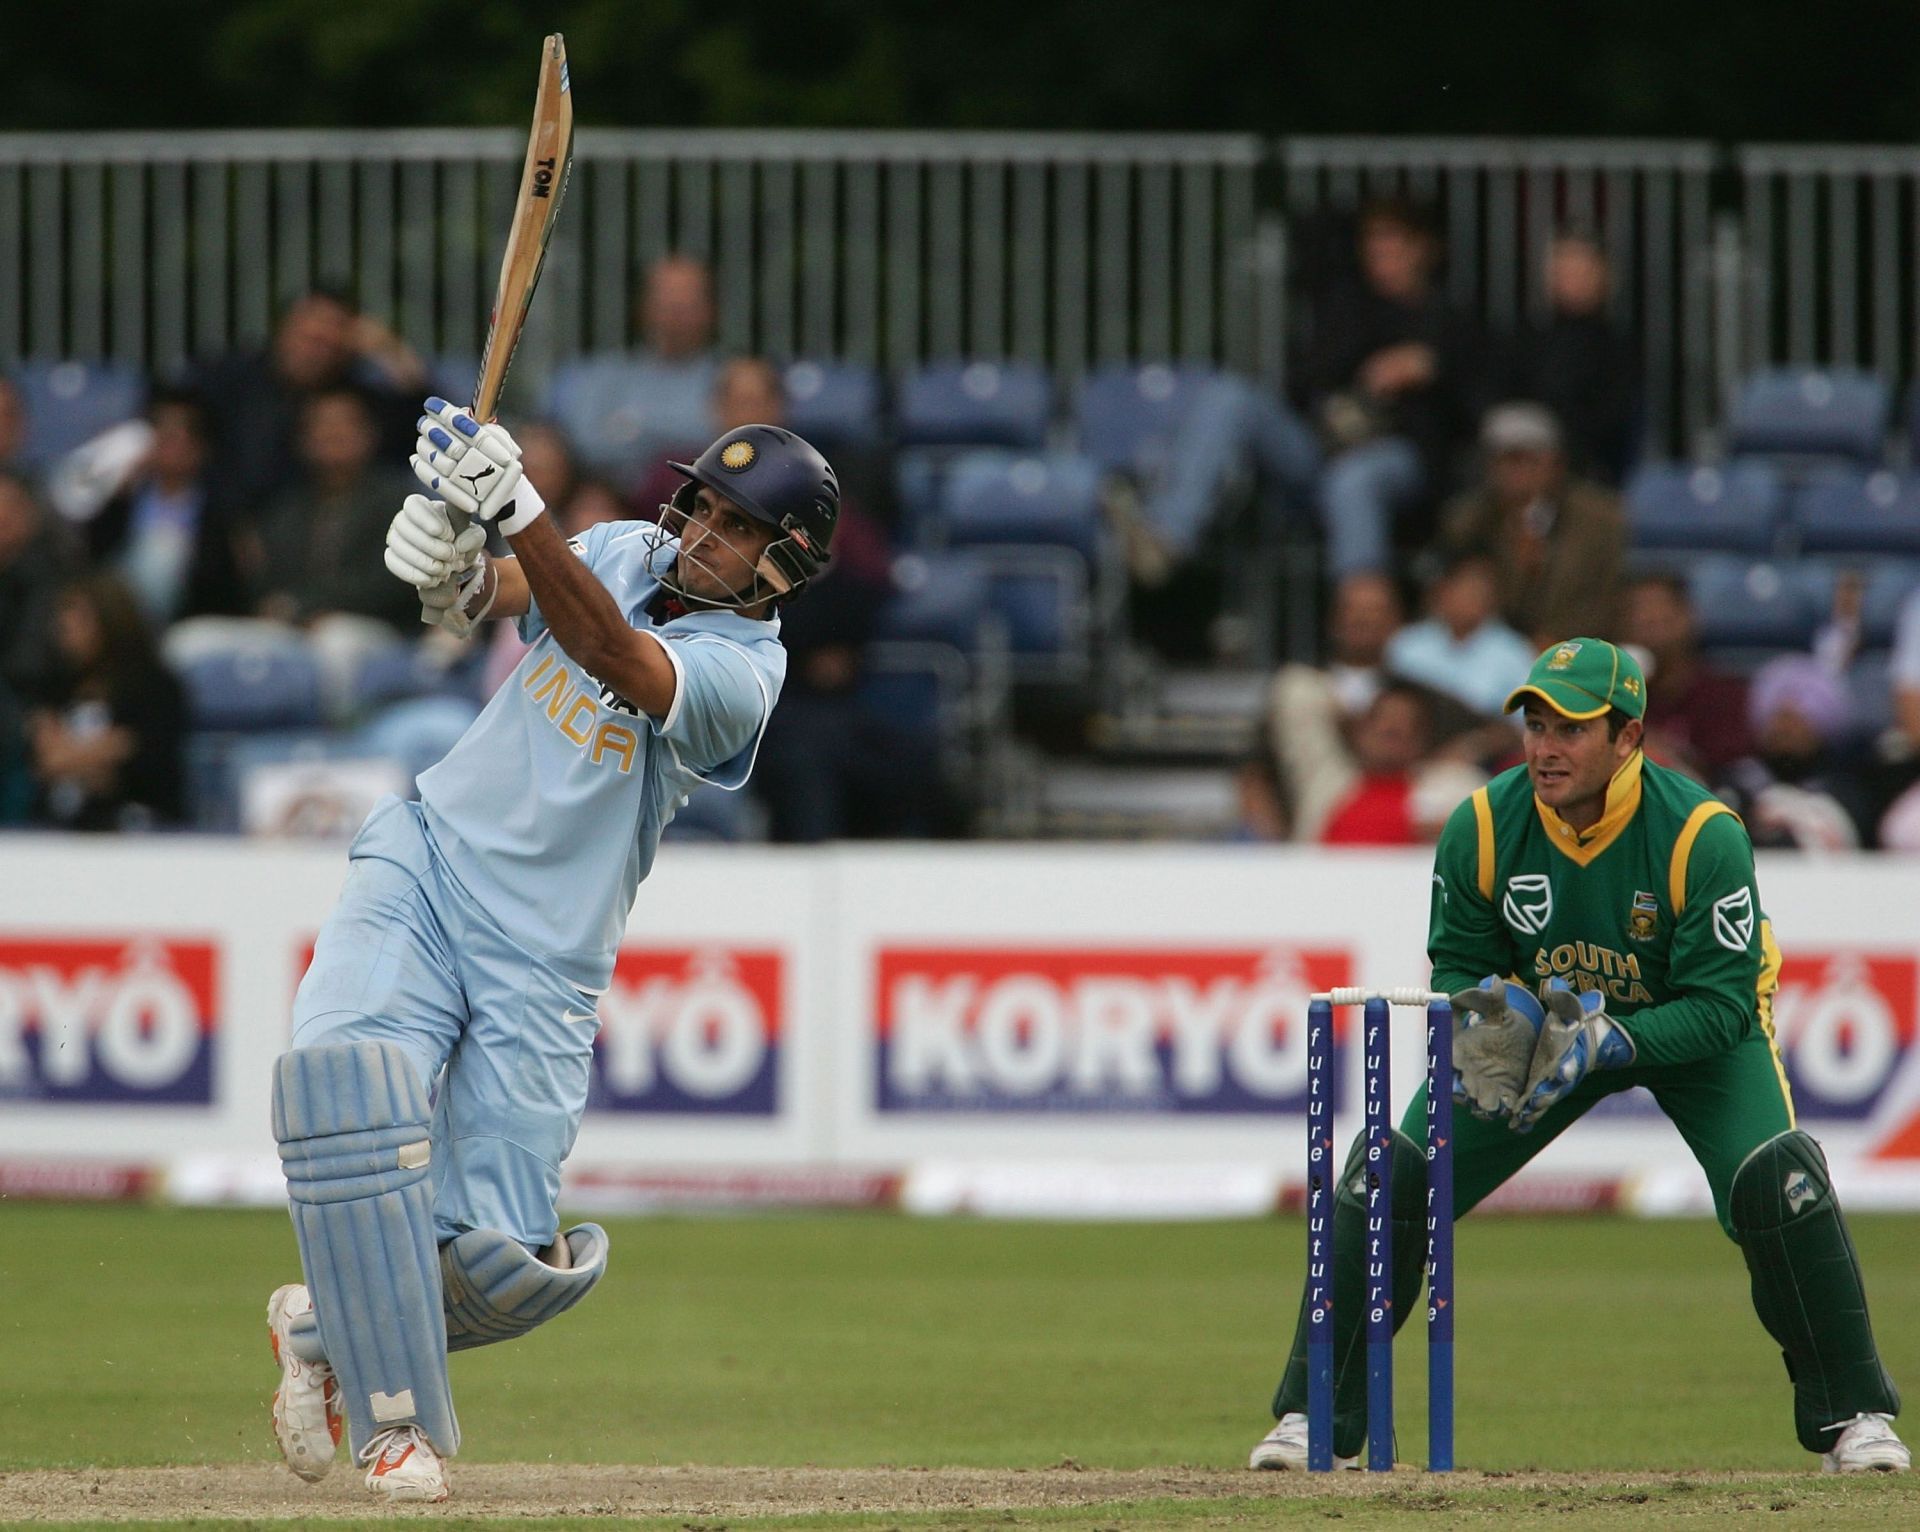 Sourav Ganguly batting in an ODI against South Africa. Pic: Getty Images